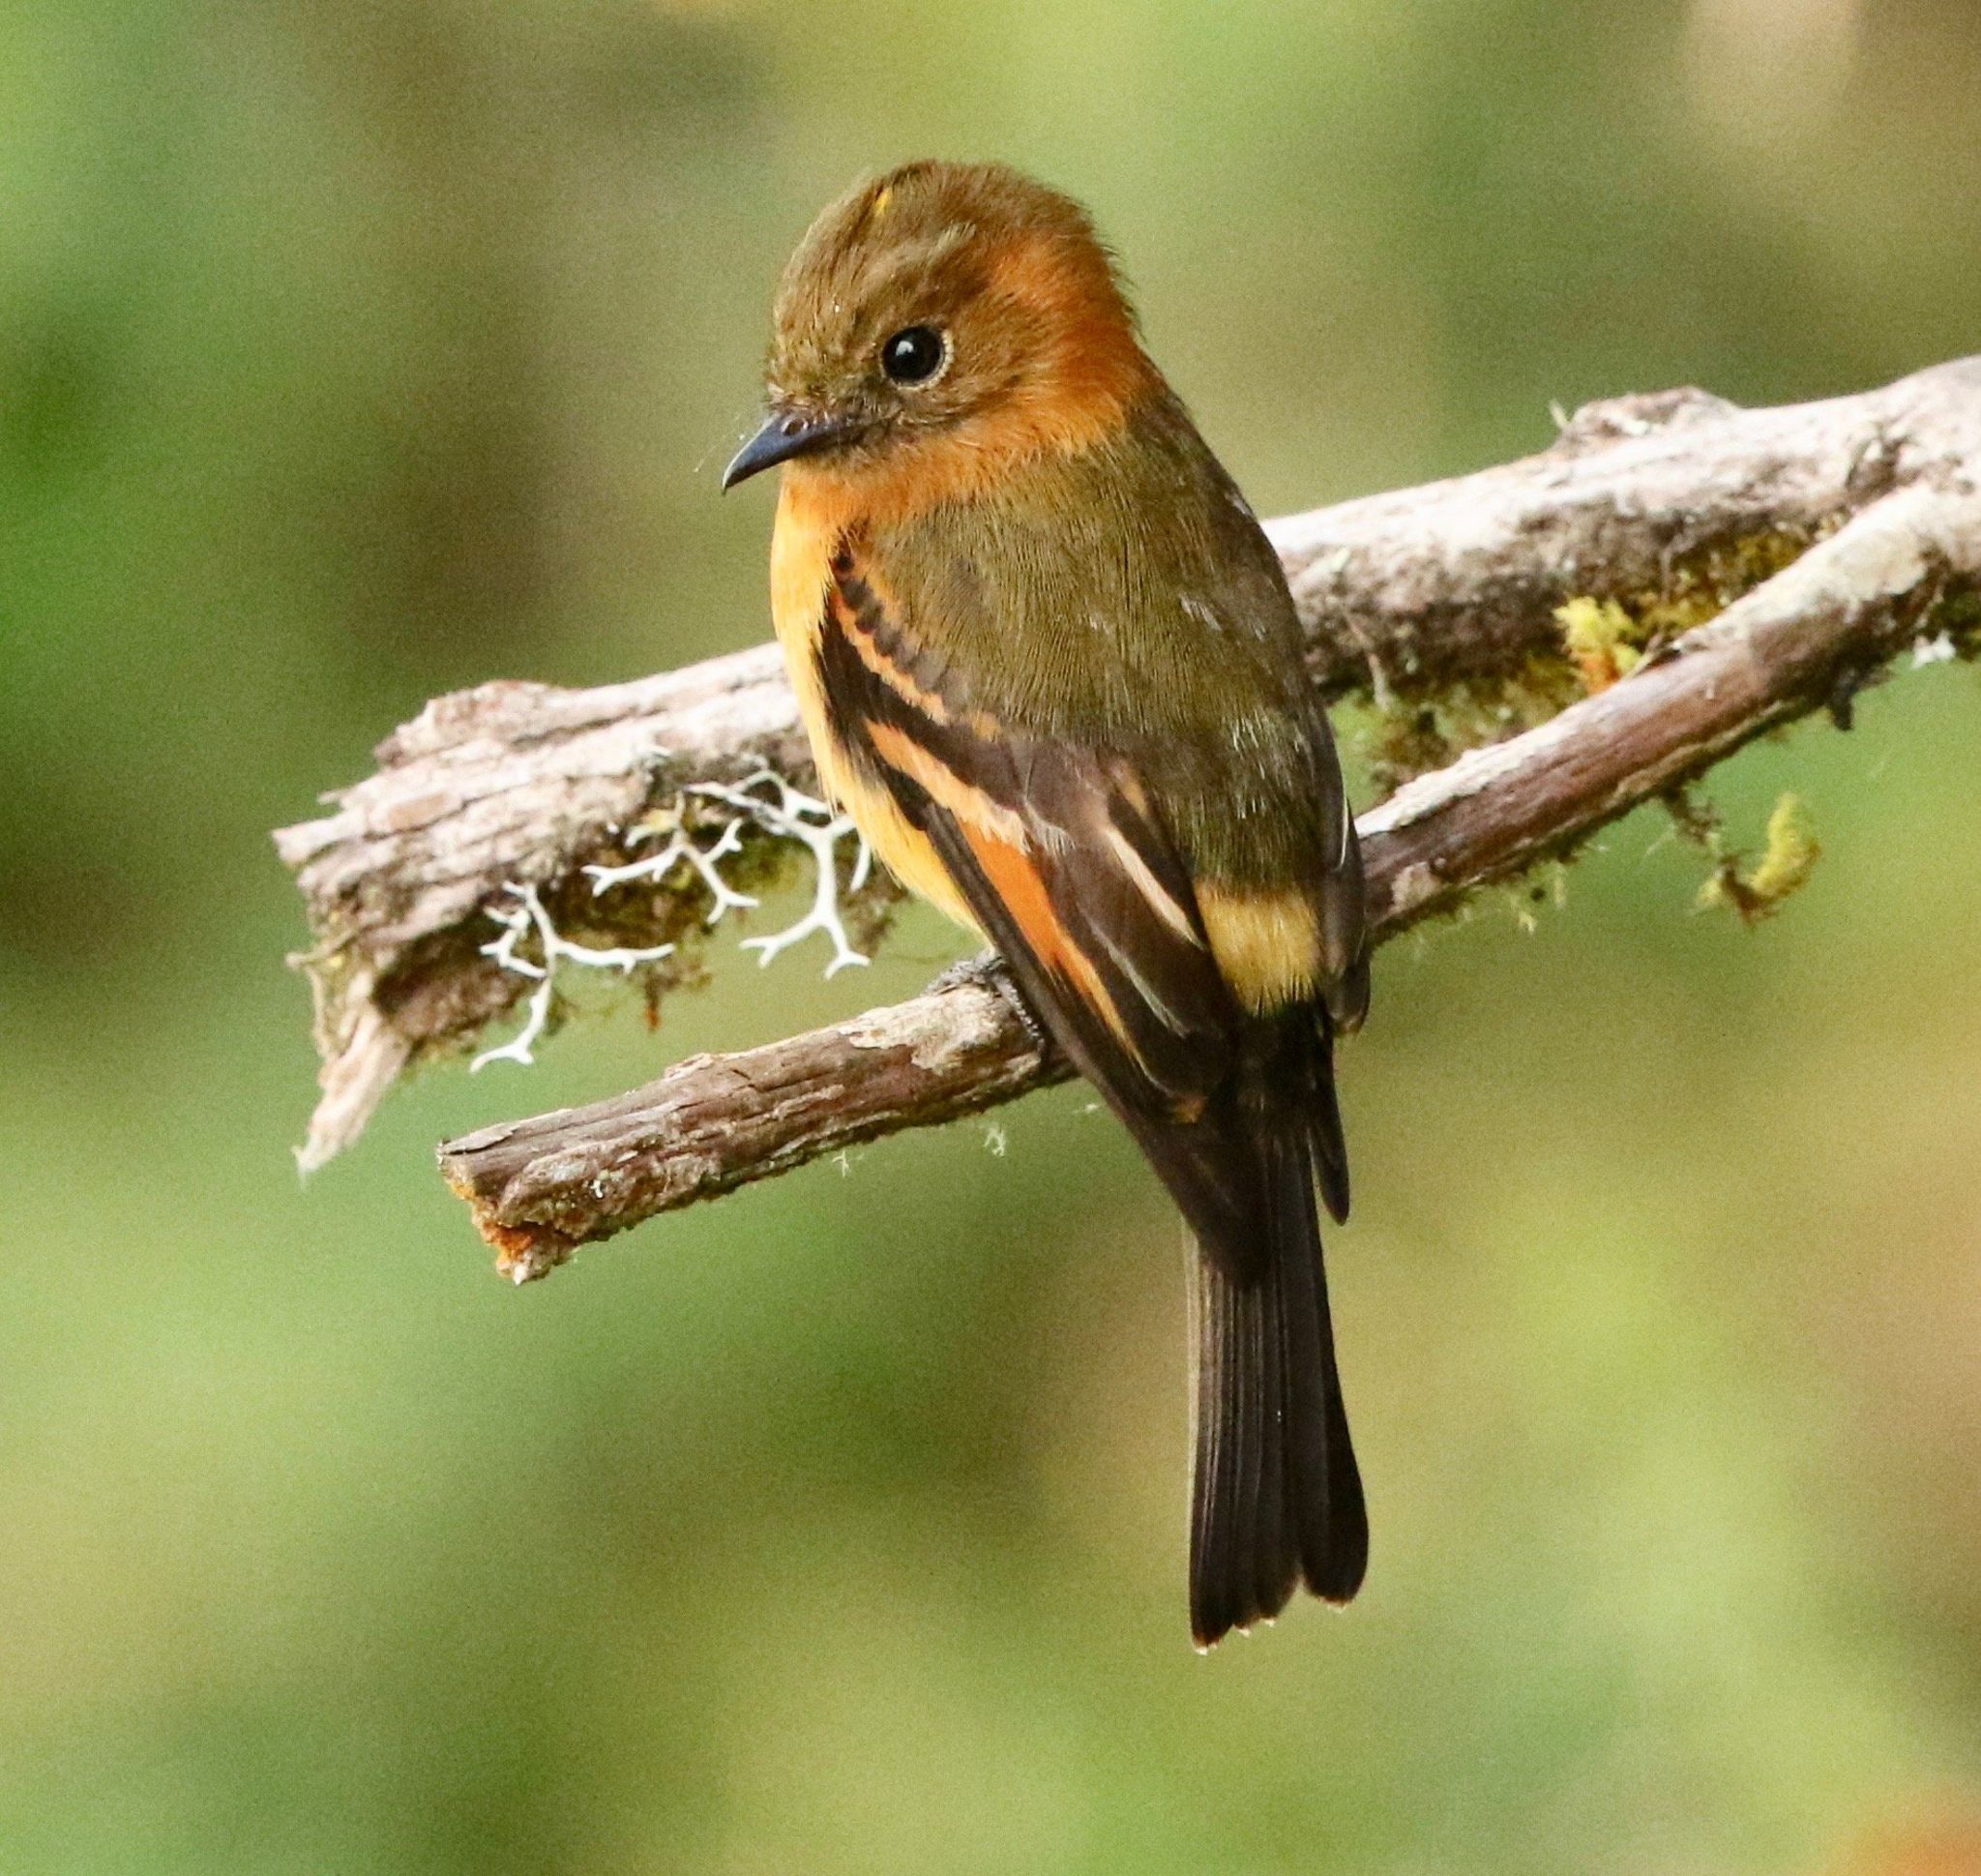 Cinnamon flycatcher, Pyrrhomyias cinnamomeus. One of the most attractive and approachable birds of Colombia's high montane forest.